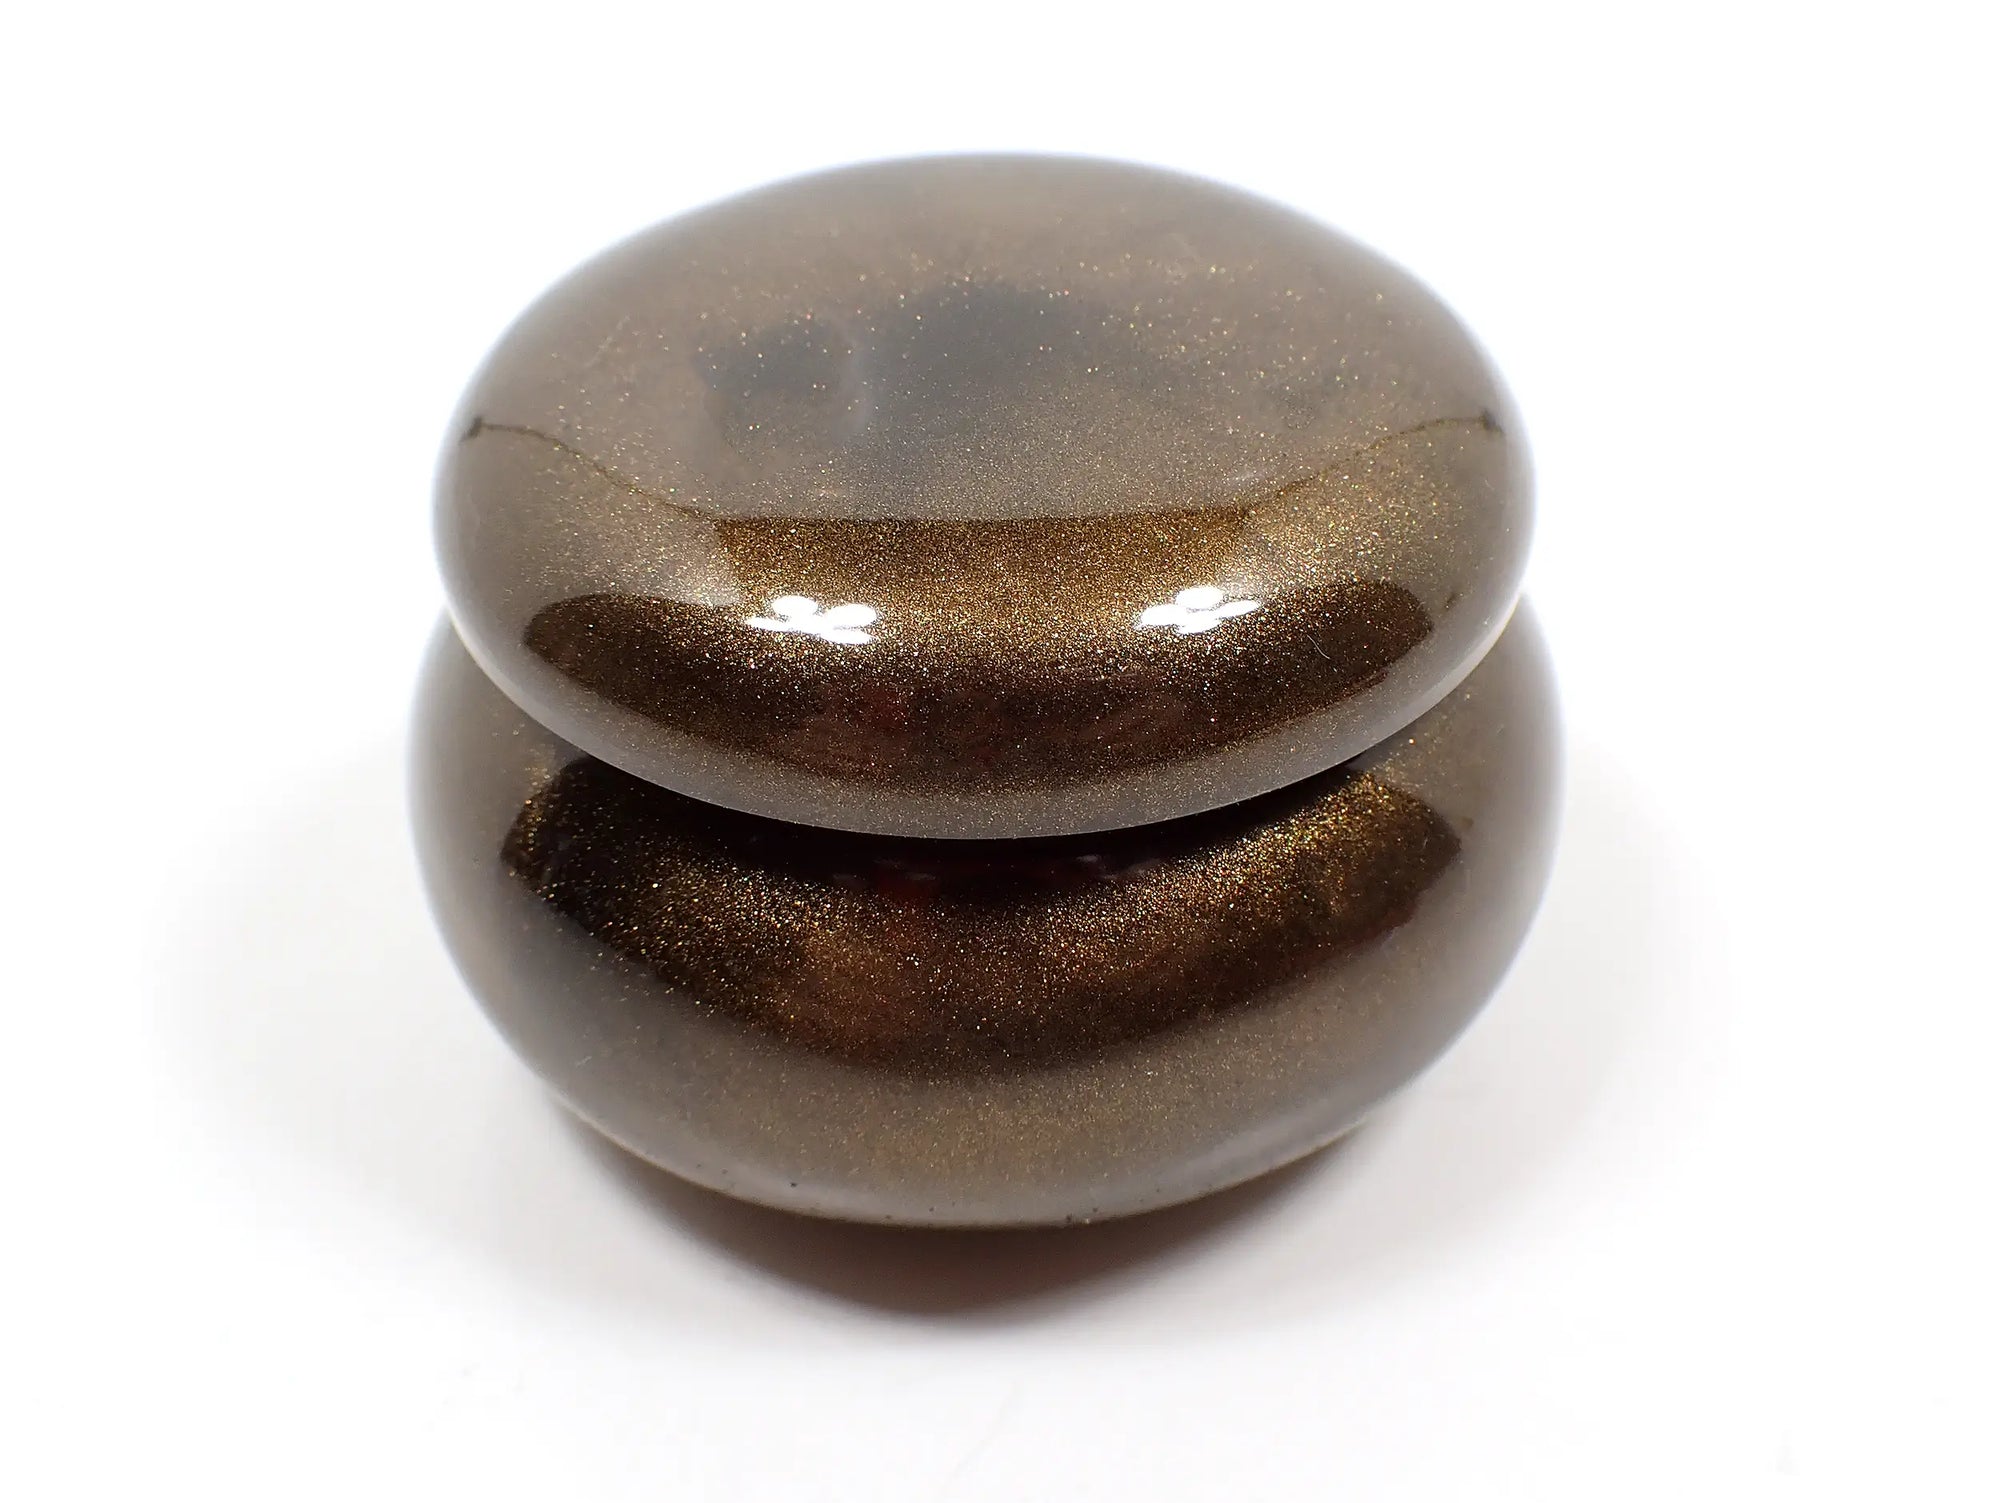 Side view of the smaller sized handmade resin trinket box. It has a rounded wide jar like shape with a round lid. The resin is pearly chocolate brown in color.